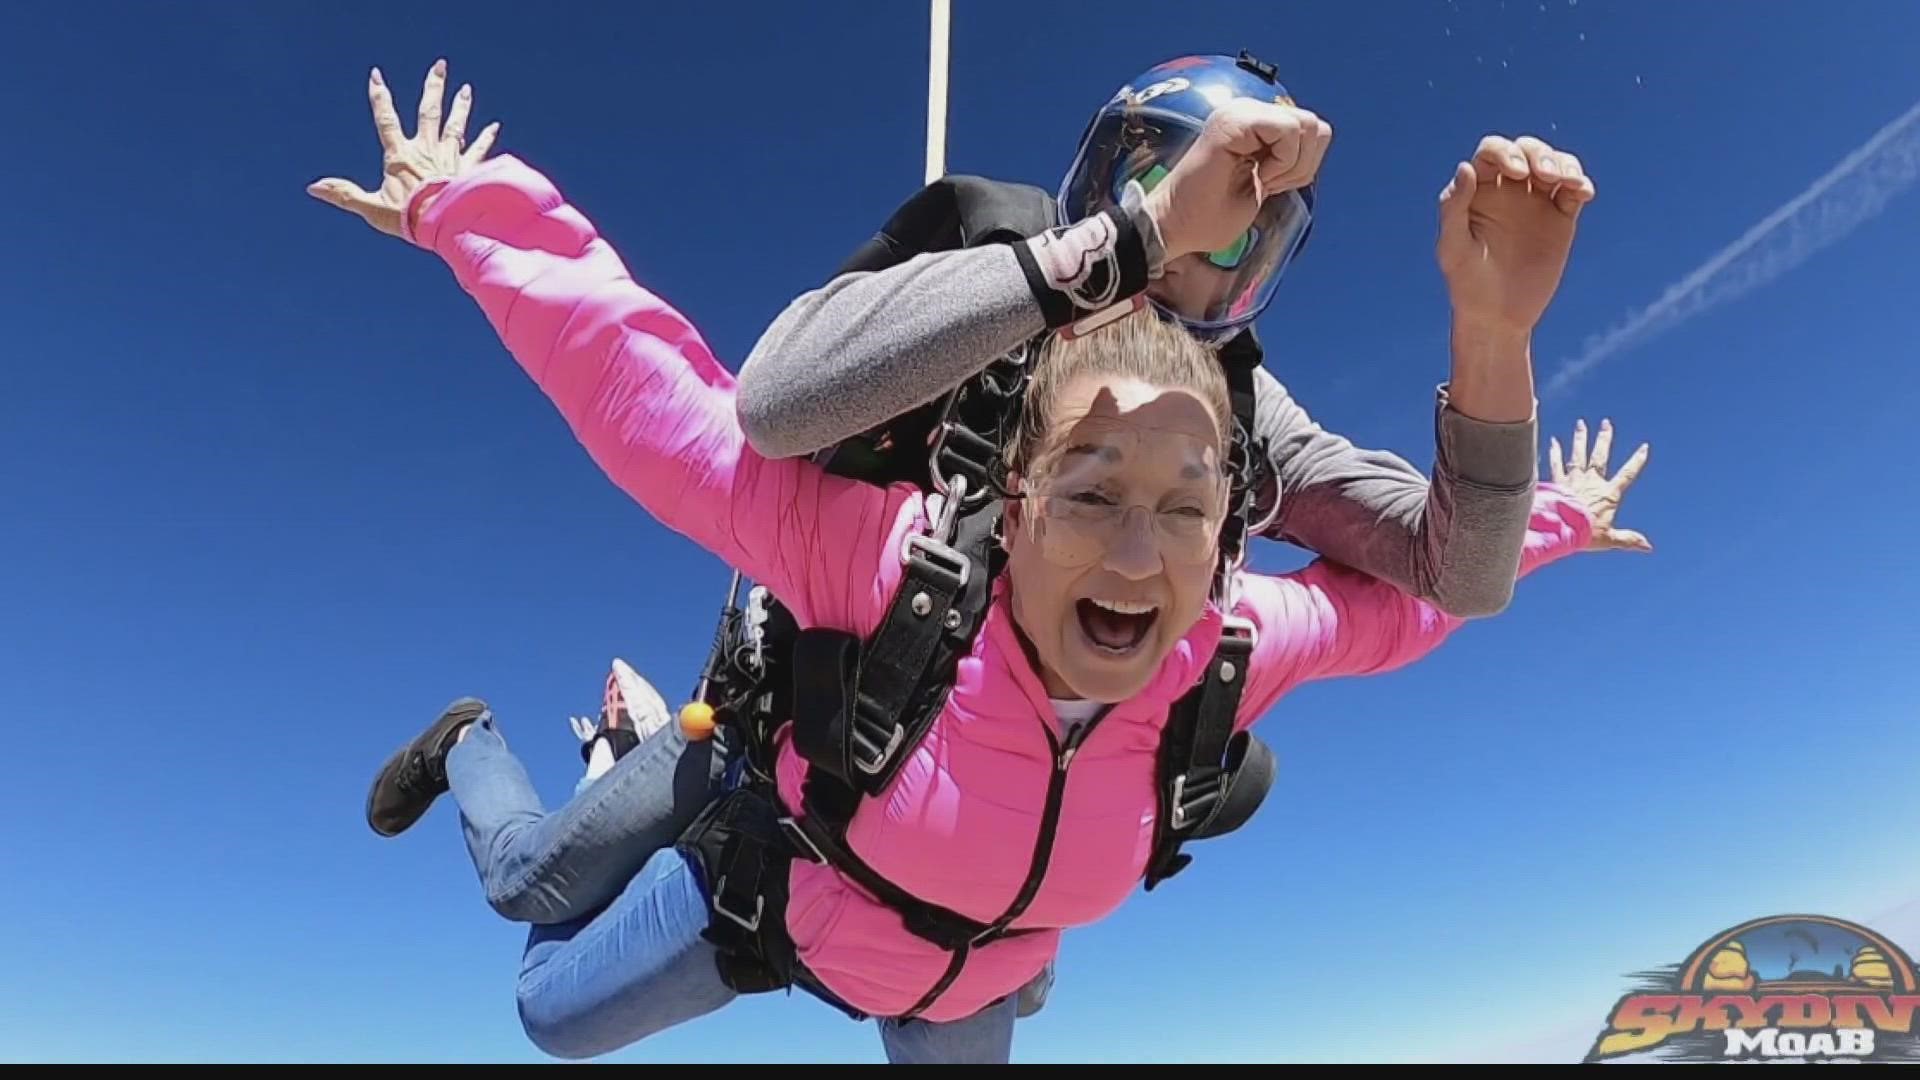 60-year-old Theresa Candelaria knew she had a lot to live for when she was diagnosed with cancer. Now that she is cancer-free, she celebrated by skydiving in Utah.